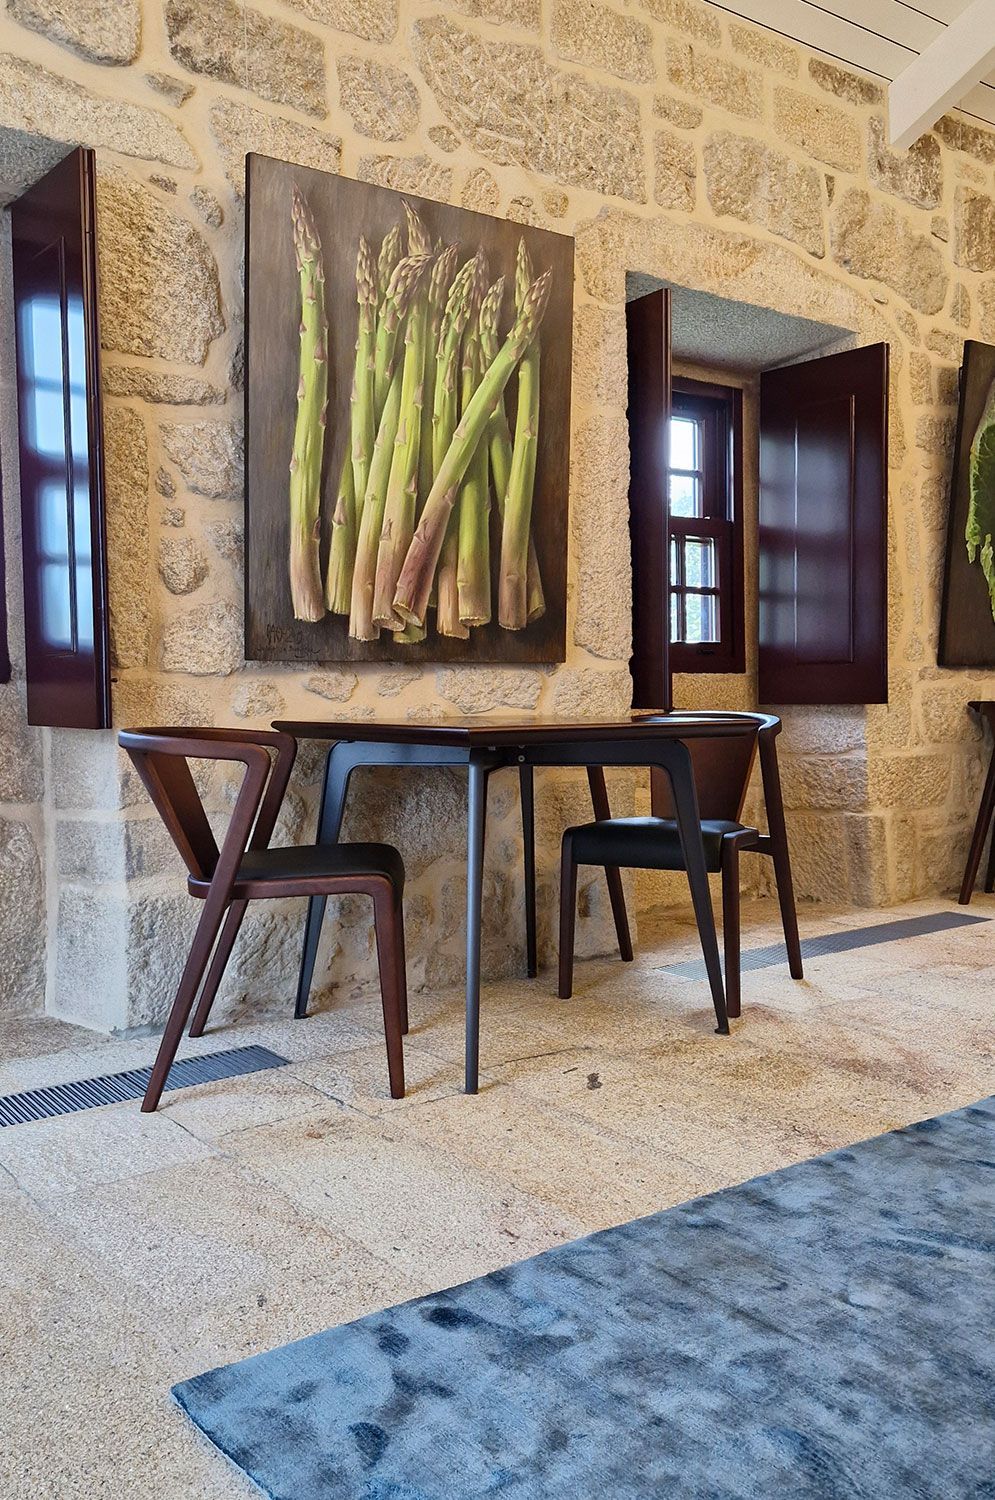 A room with a table and chairs and a painting of asparagus on the wall.